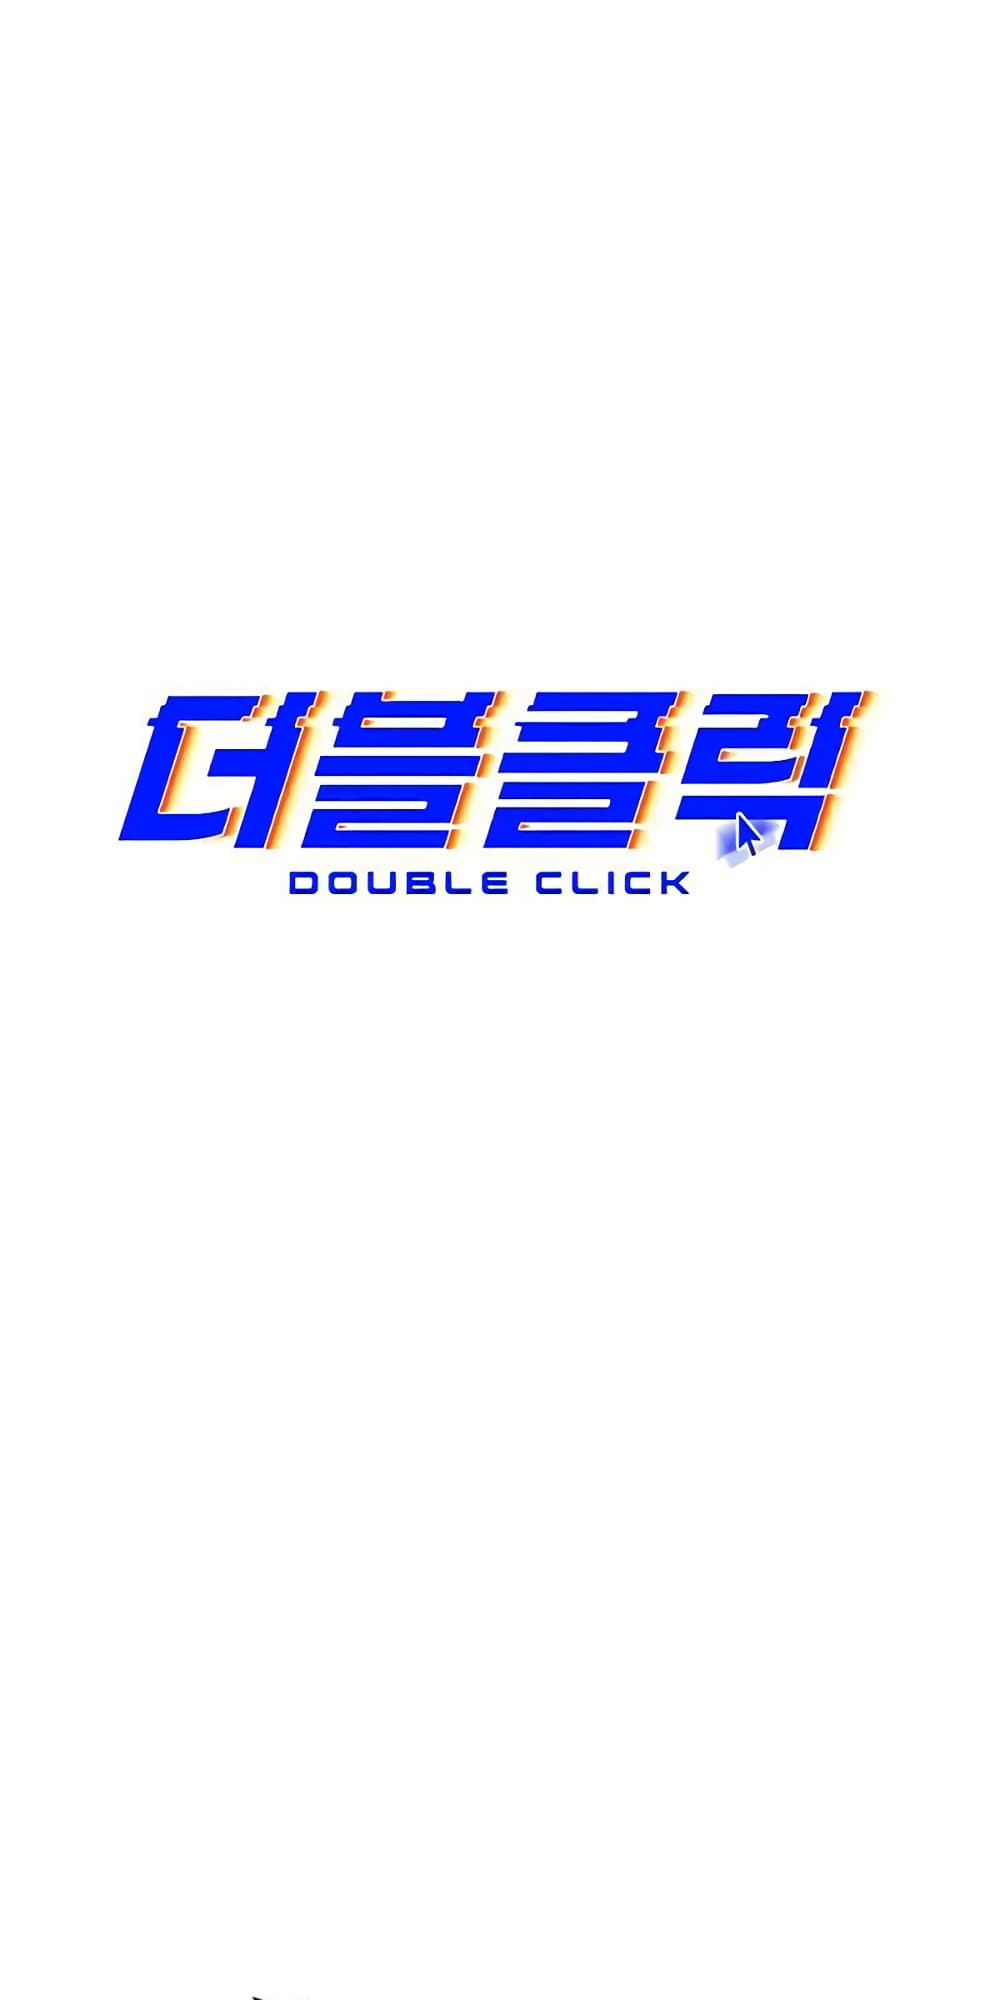 Double Click 5 (6)